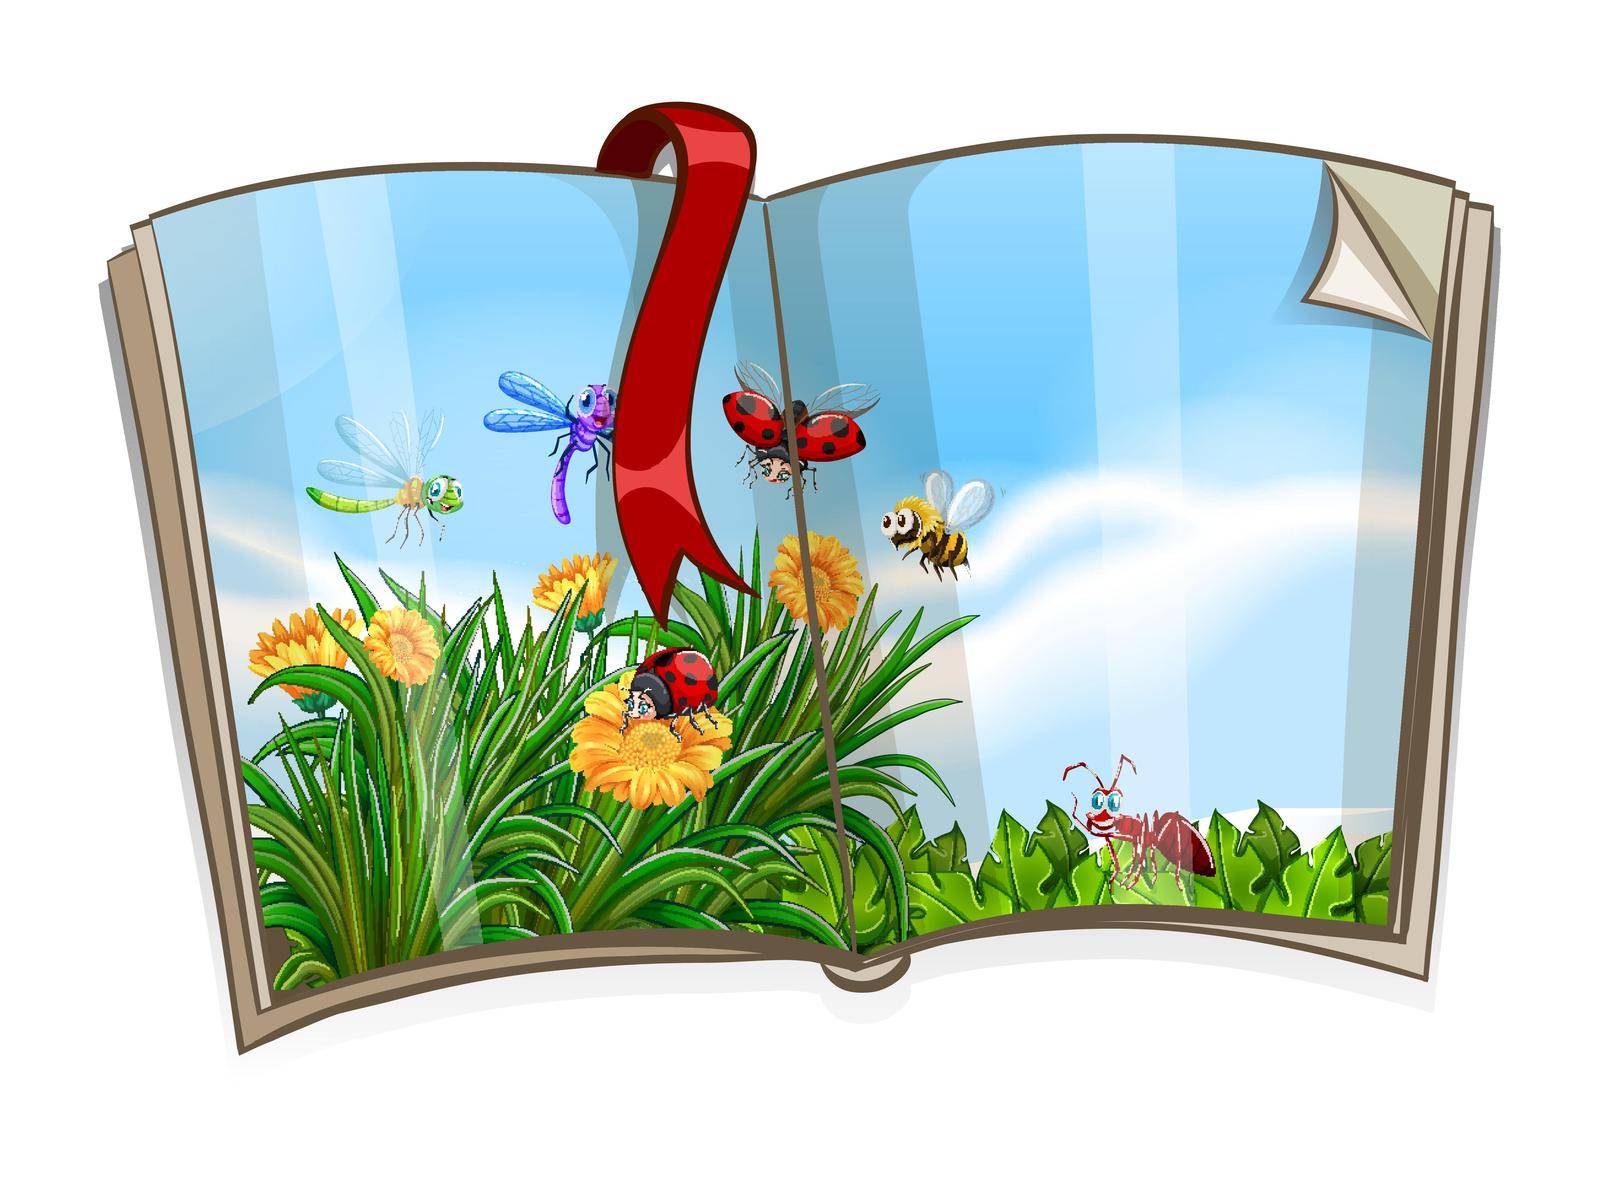 Book with insects flying in garden scene illustration